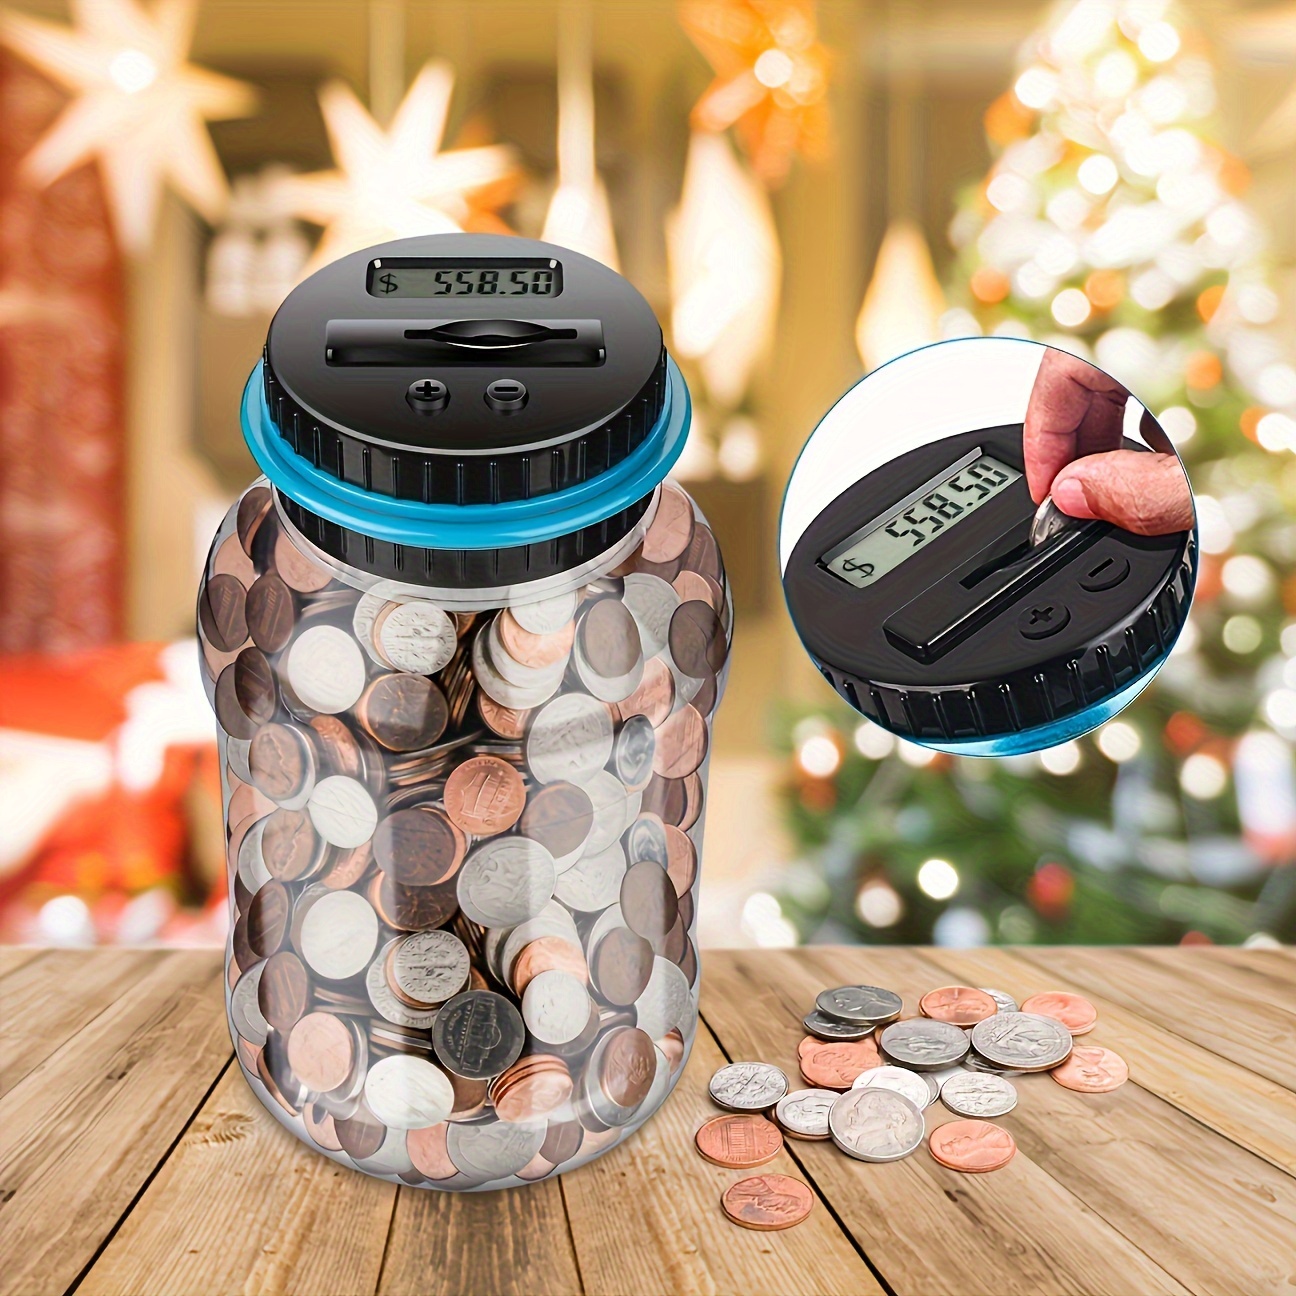 

smart Save" Large Automatic Coin Counting Jar With Lcd Display - Resin Money Storage Box, Perfect For Saving & Gifting On Halloween, Thanksgiving, Christmas